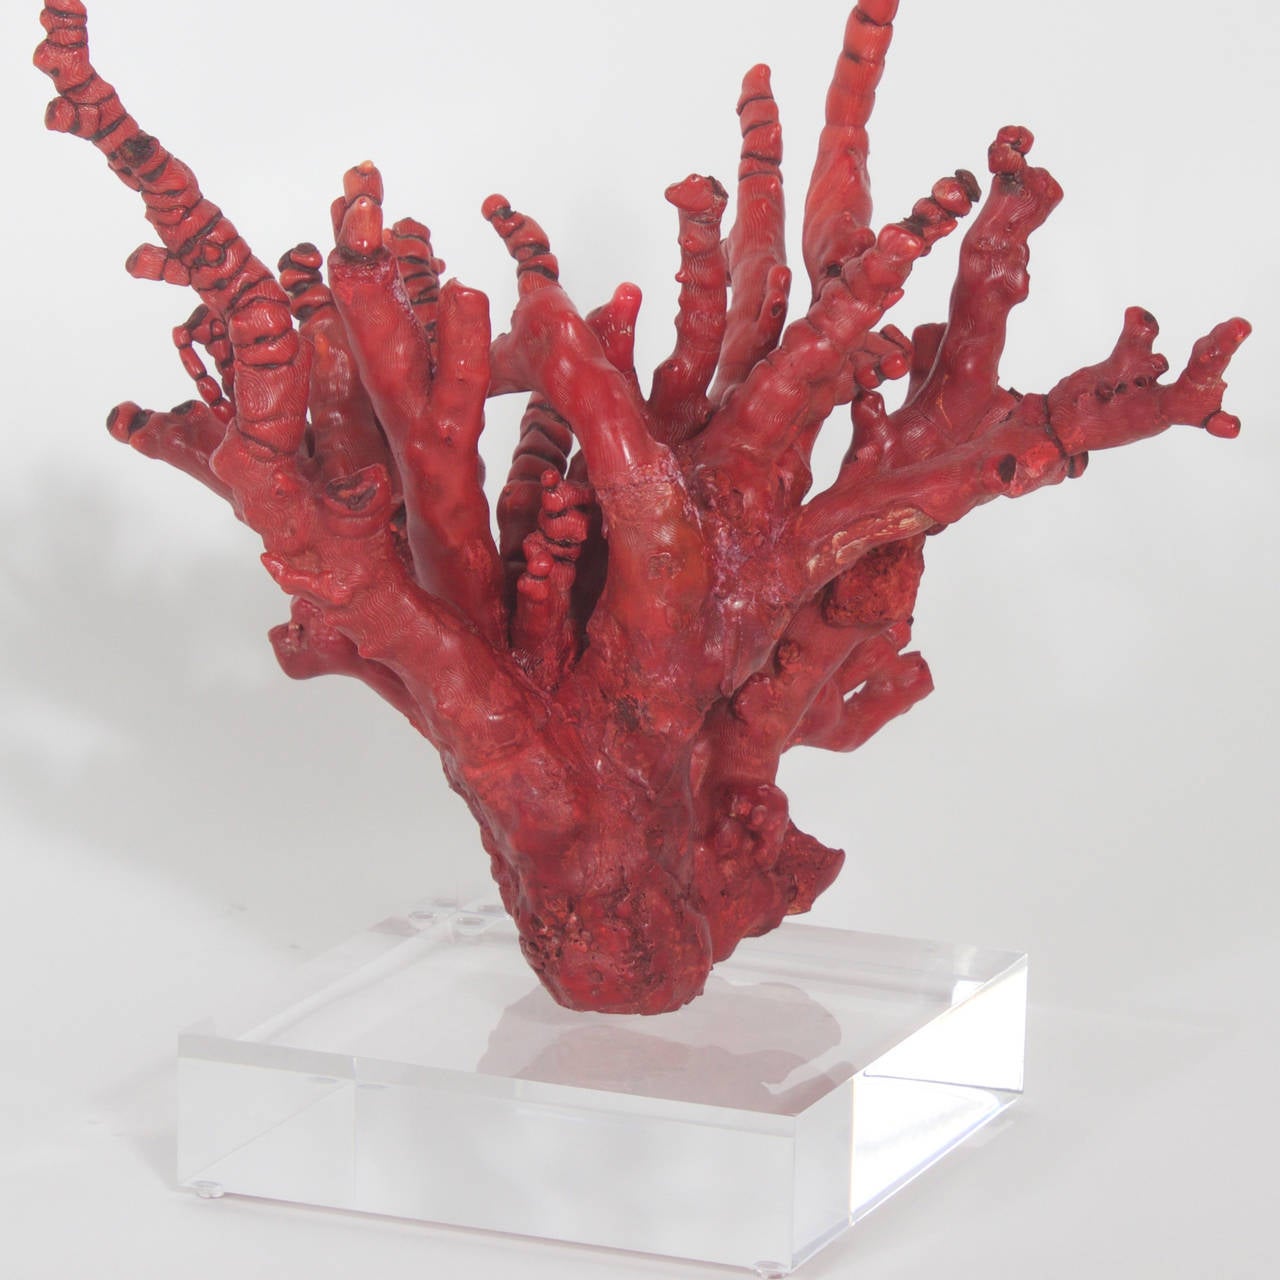 Impressive rare Red Bamboo Coral specimen presented on a thick block of lucite. Having dramatic well composed form that is viewable from all 4 sides. Can be used as a center piece or enjoyed as the sculptural work of art that mother nature created